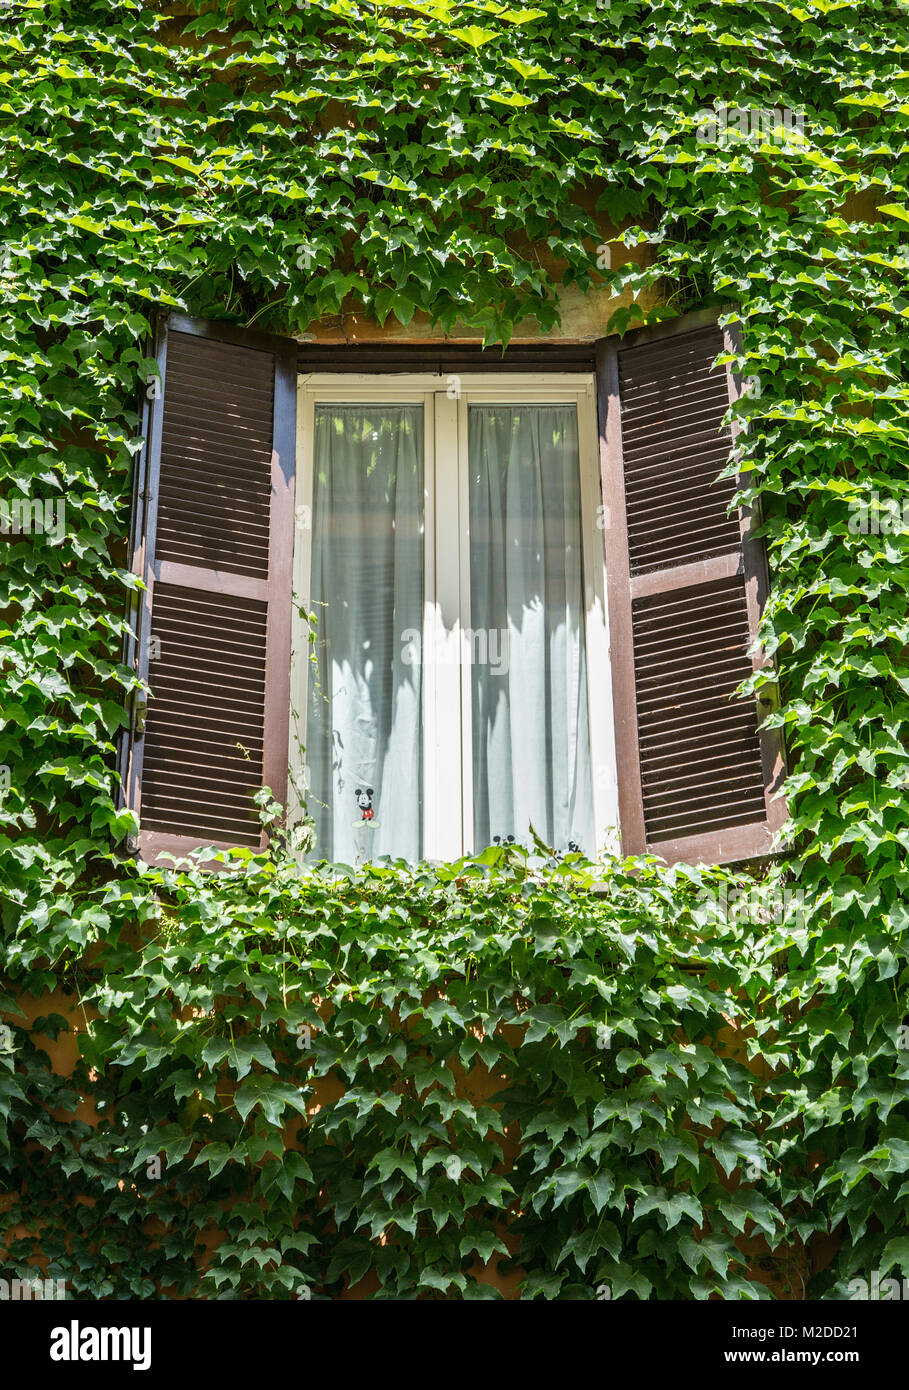 Window with opened shutters in the vine-shrouded wall. Stock Photo